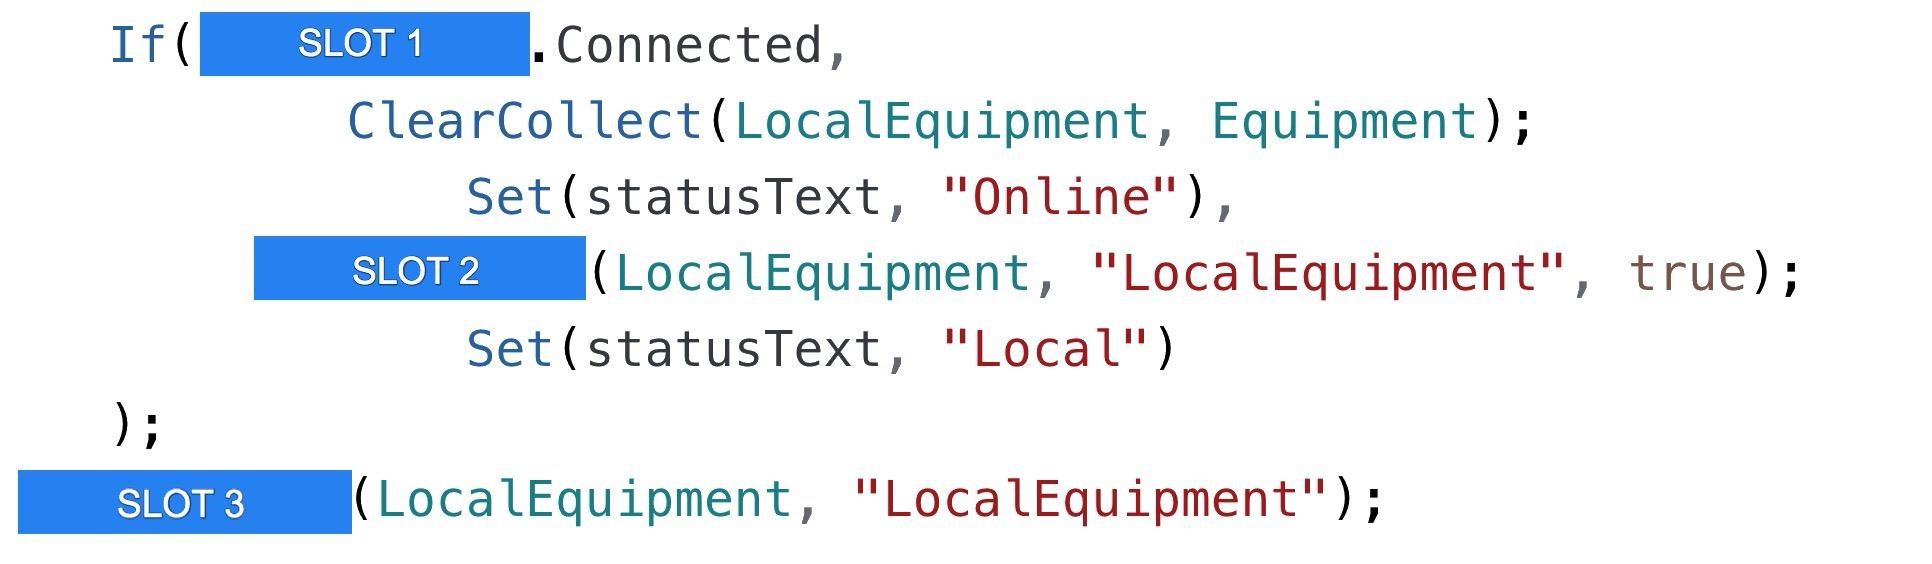 If (STO. connected,

ClearCollect(LocalEquipment, Equipment);
Set(statusText, "Online"),
TS (LocalEquipment, "LocalEquipment", true);
Set(statusText, "Local")
3
Storm LocalEquipment, "LocalEquipment") ;